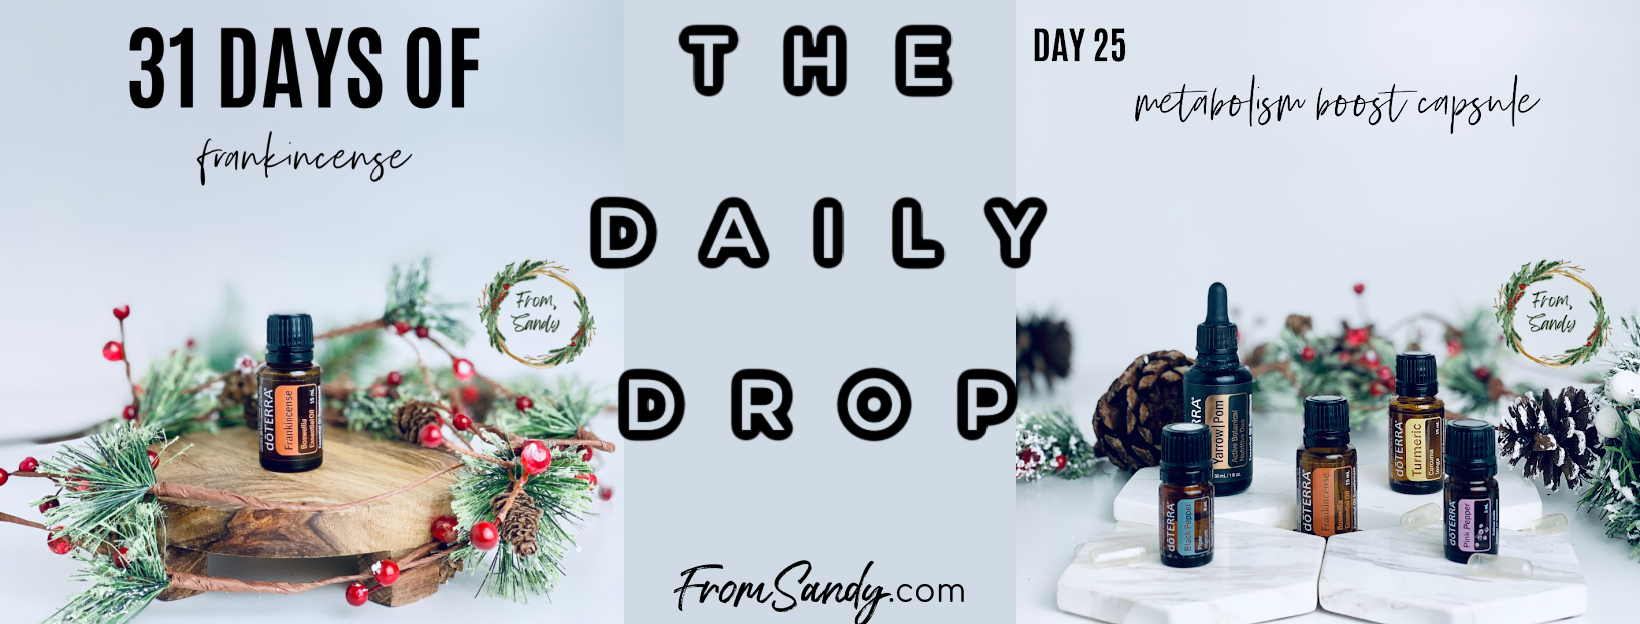 Metabolism Boost Capsule (31 Days of Frankincense: Day 25), From Sandy